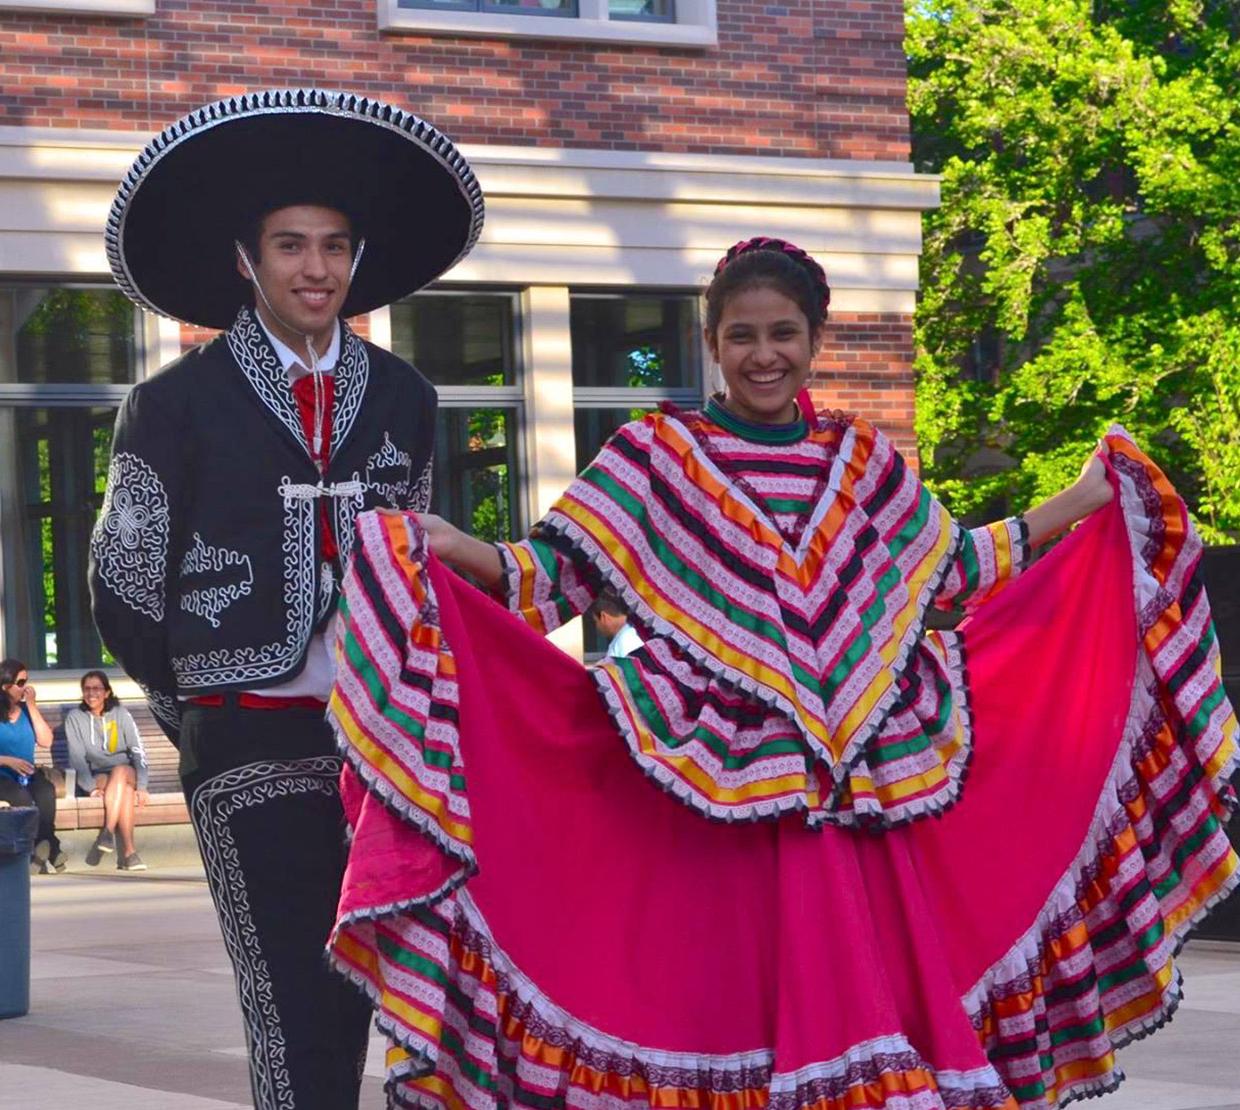 two students dressed in traditional Mexican festival garments in the SEC awning